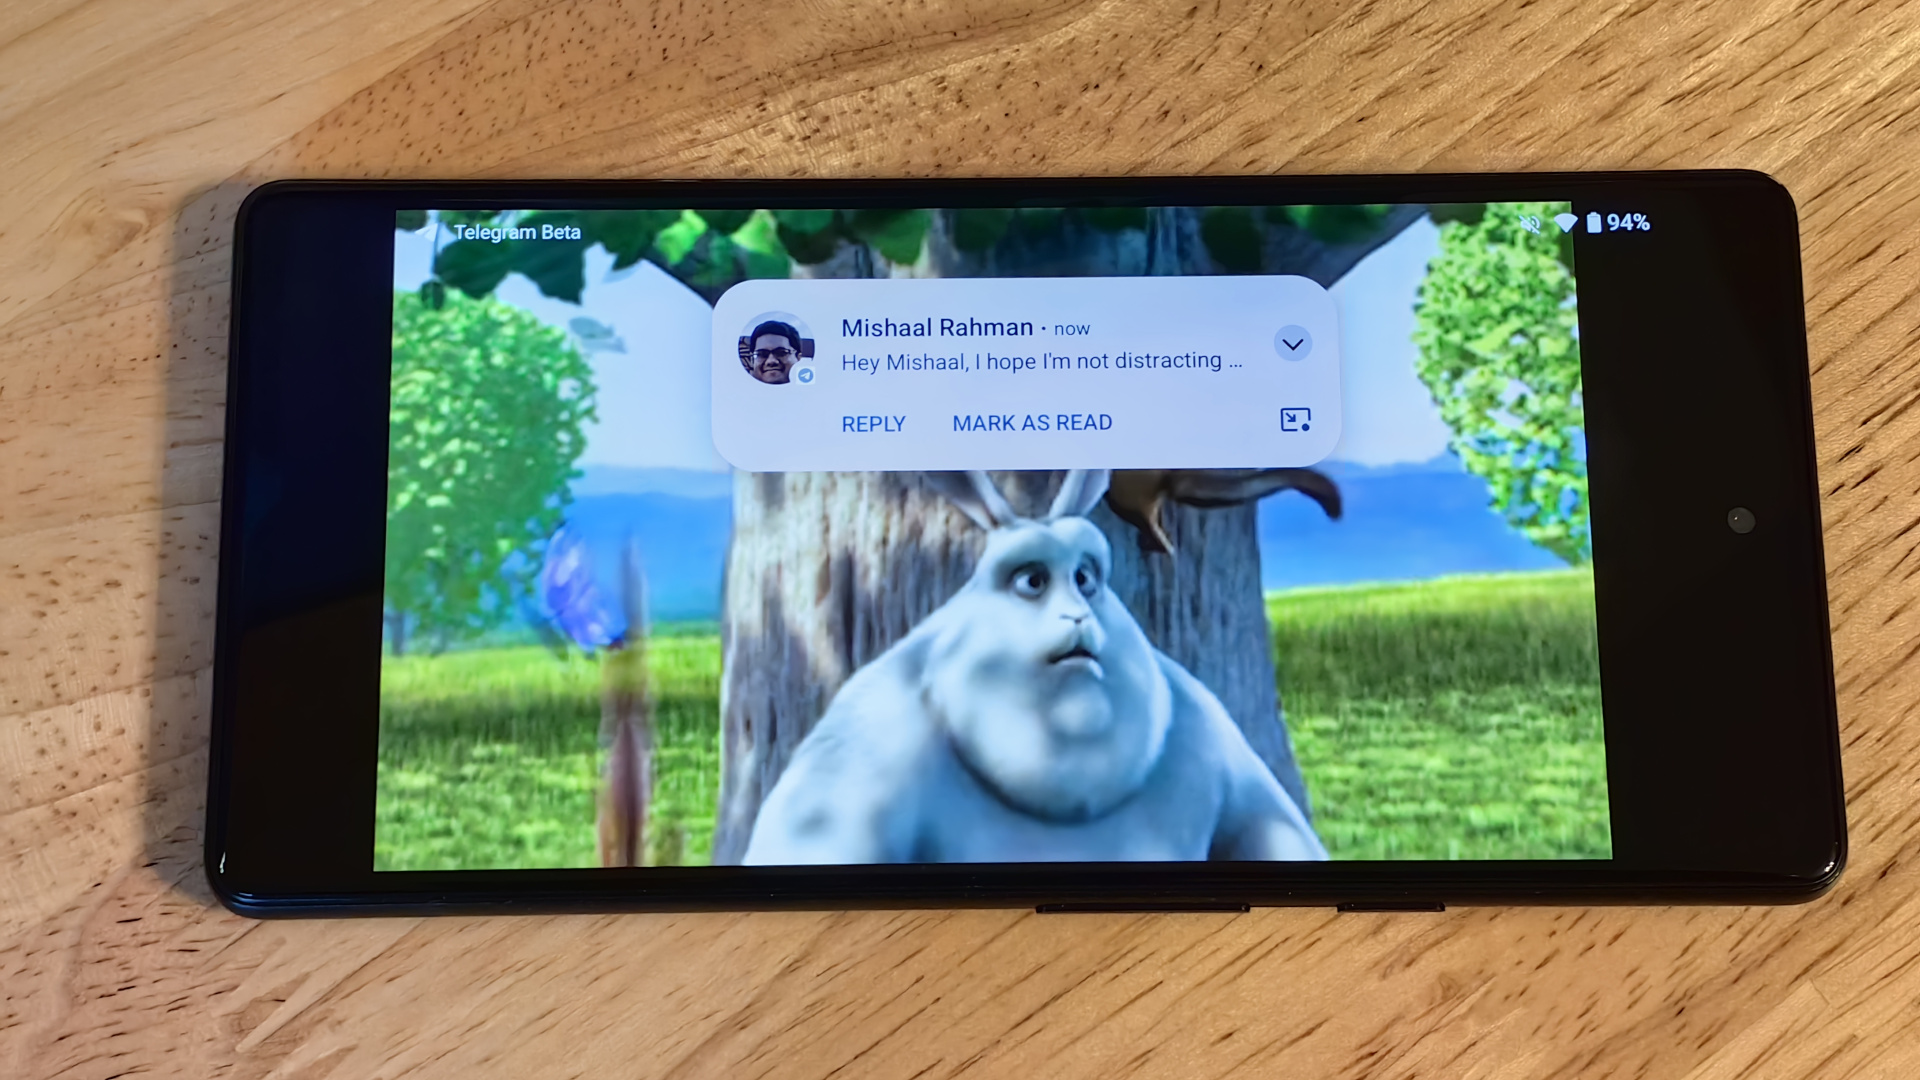 Android 15 could minimize heads-up notifications when you’re watching videos